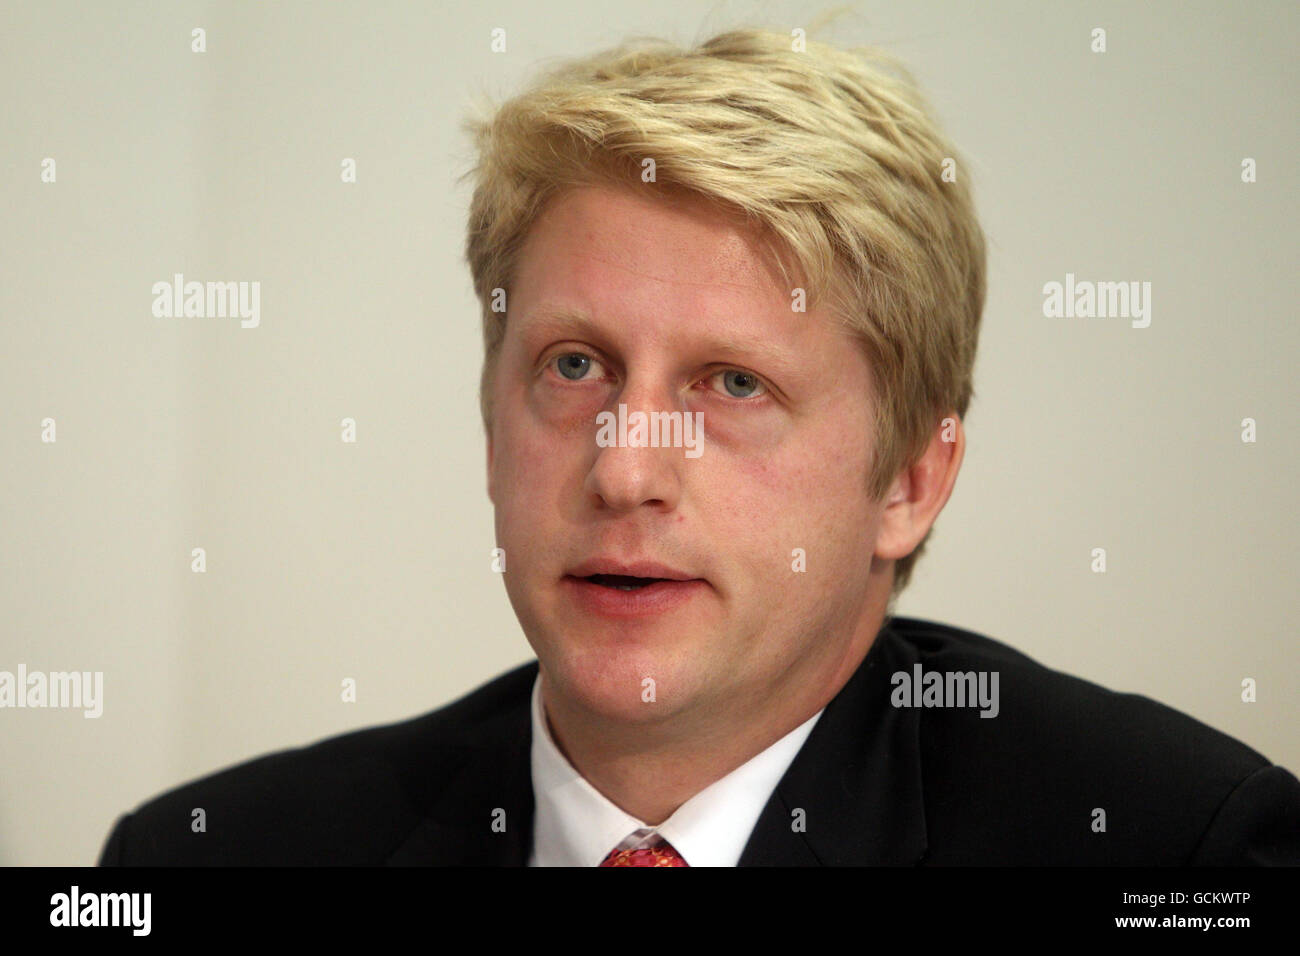 Jo Johnson MP, brother of London Mayor Boris Johnson, supporting retired British businessman Christopher Tappin at Doughty Street Chambers in London in central London. Stock Photo